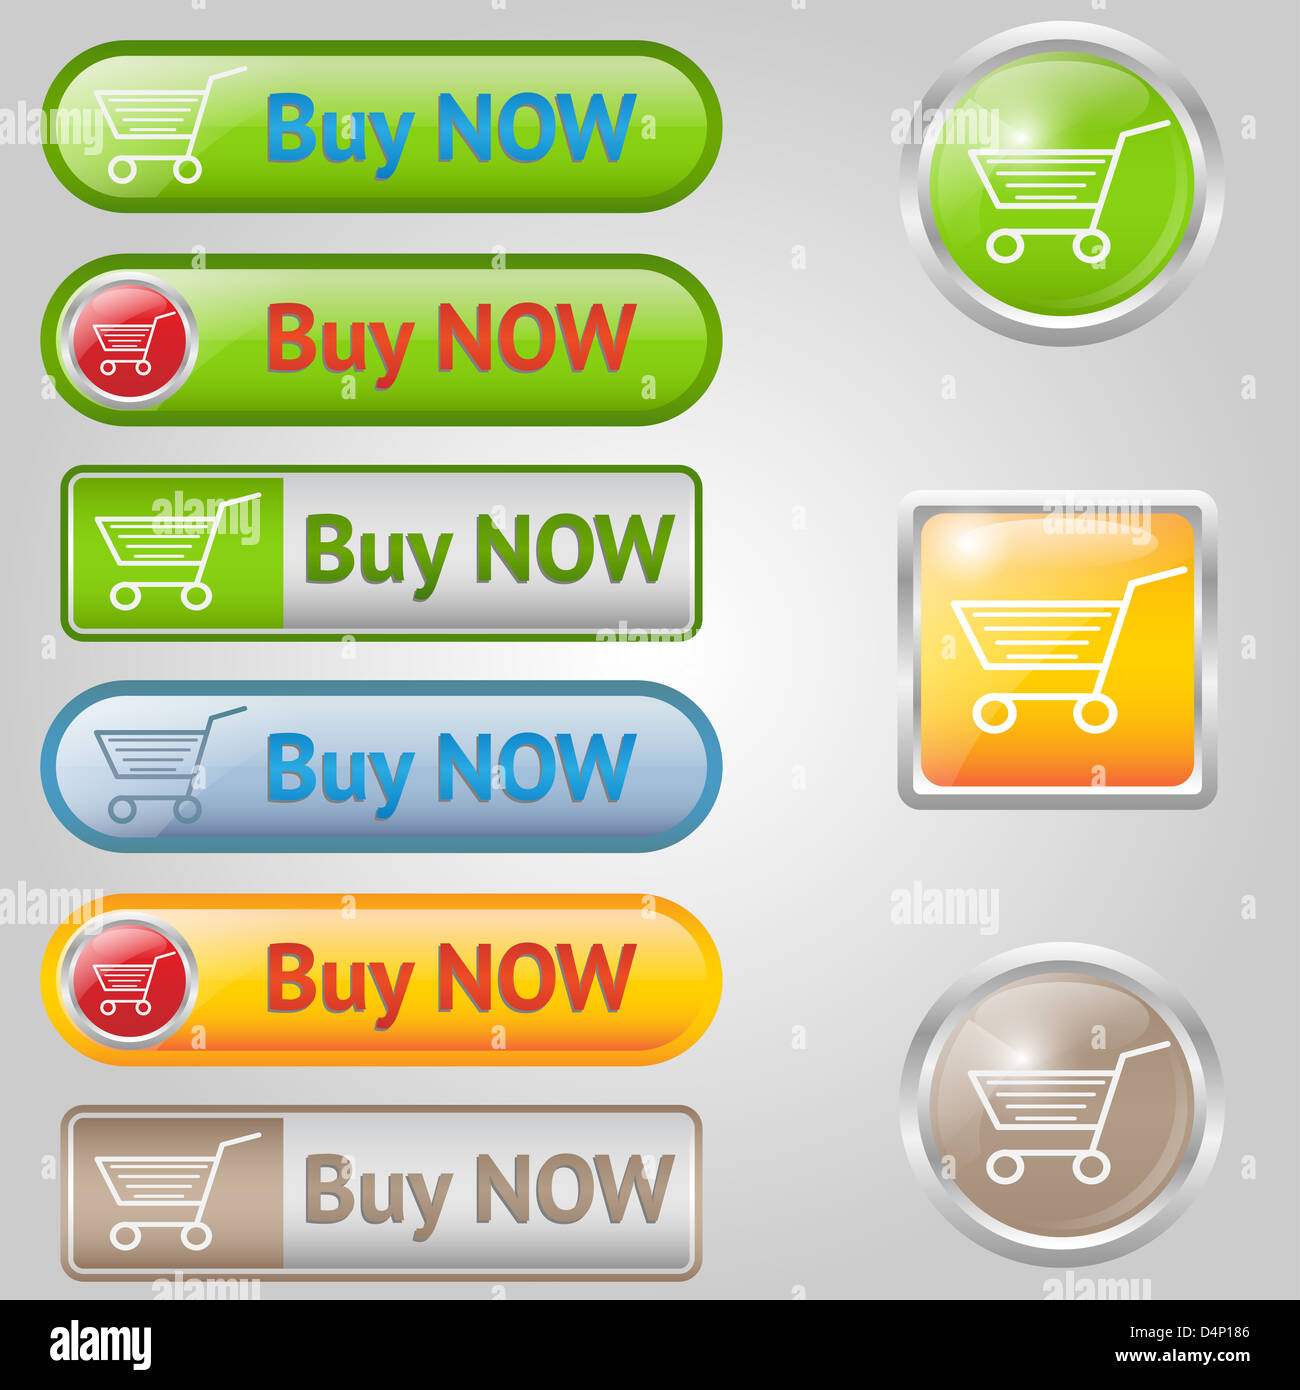 Nine shiny buy buttons with text and cart. Stock Photo